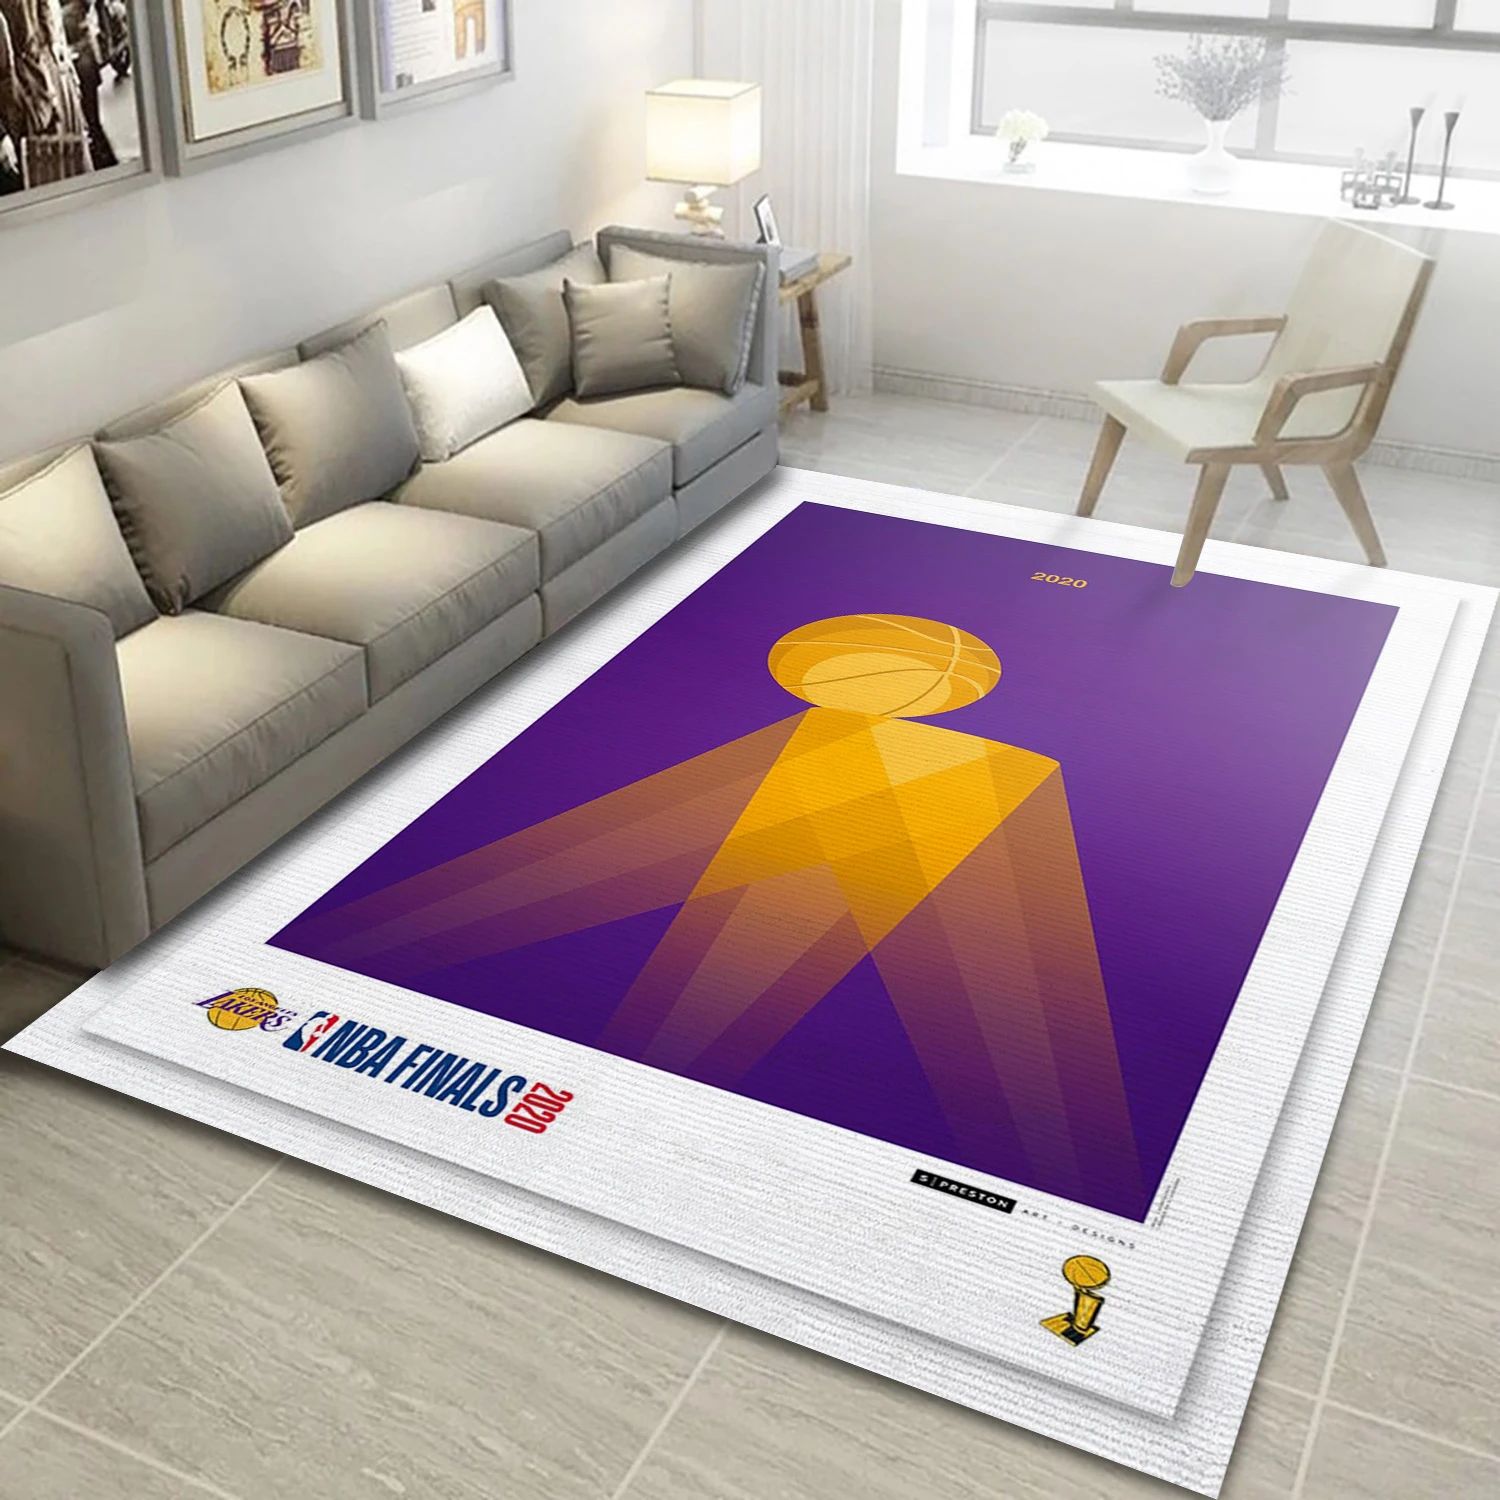 Los Angeles Lakers Nba Finals Champions NBA Area Rug Carpet, Living Room Rug - Home Decor - Indoor Outdoor Rugs 1